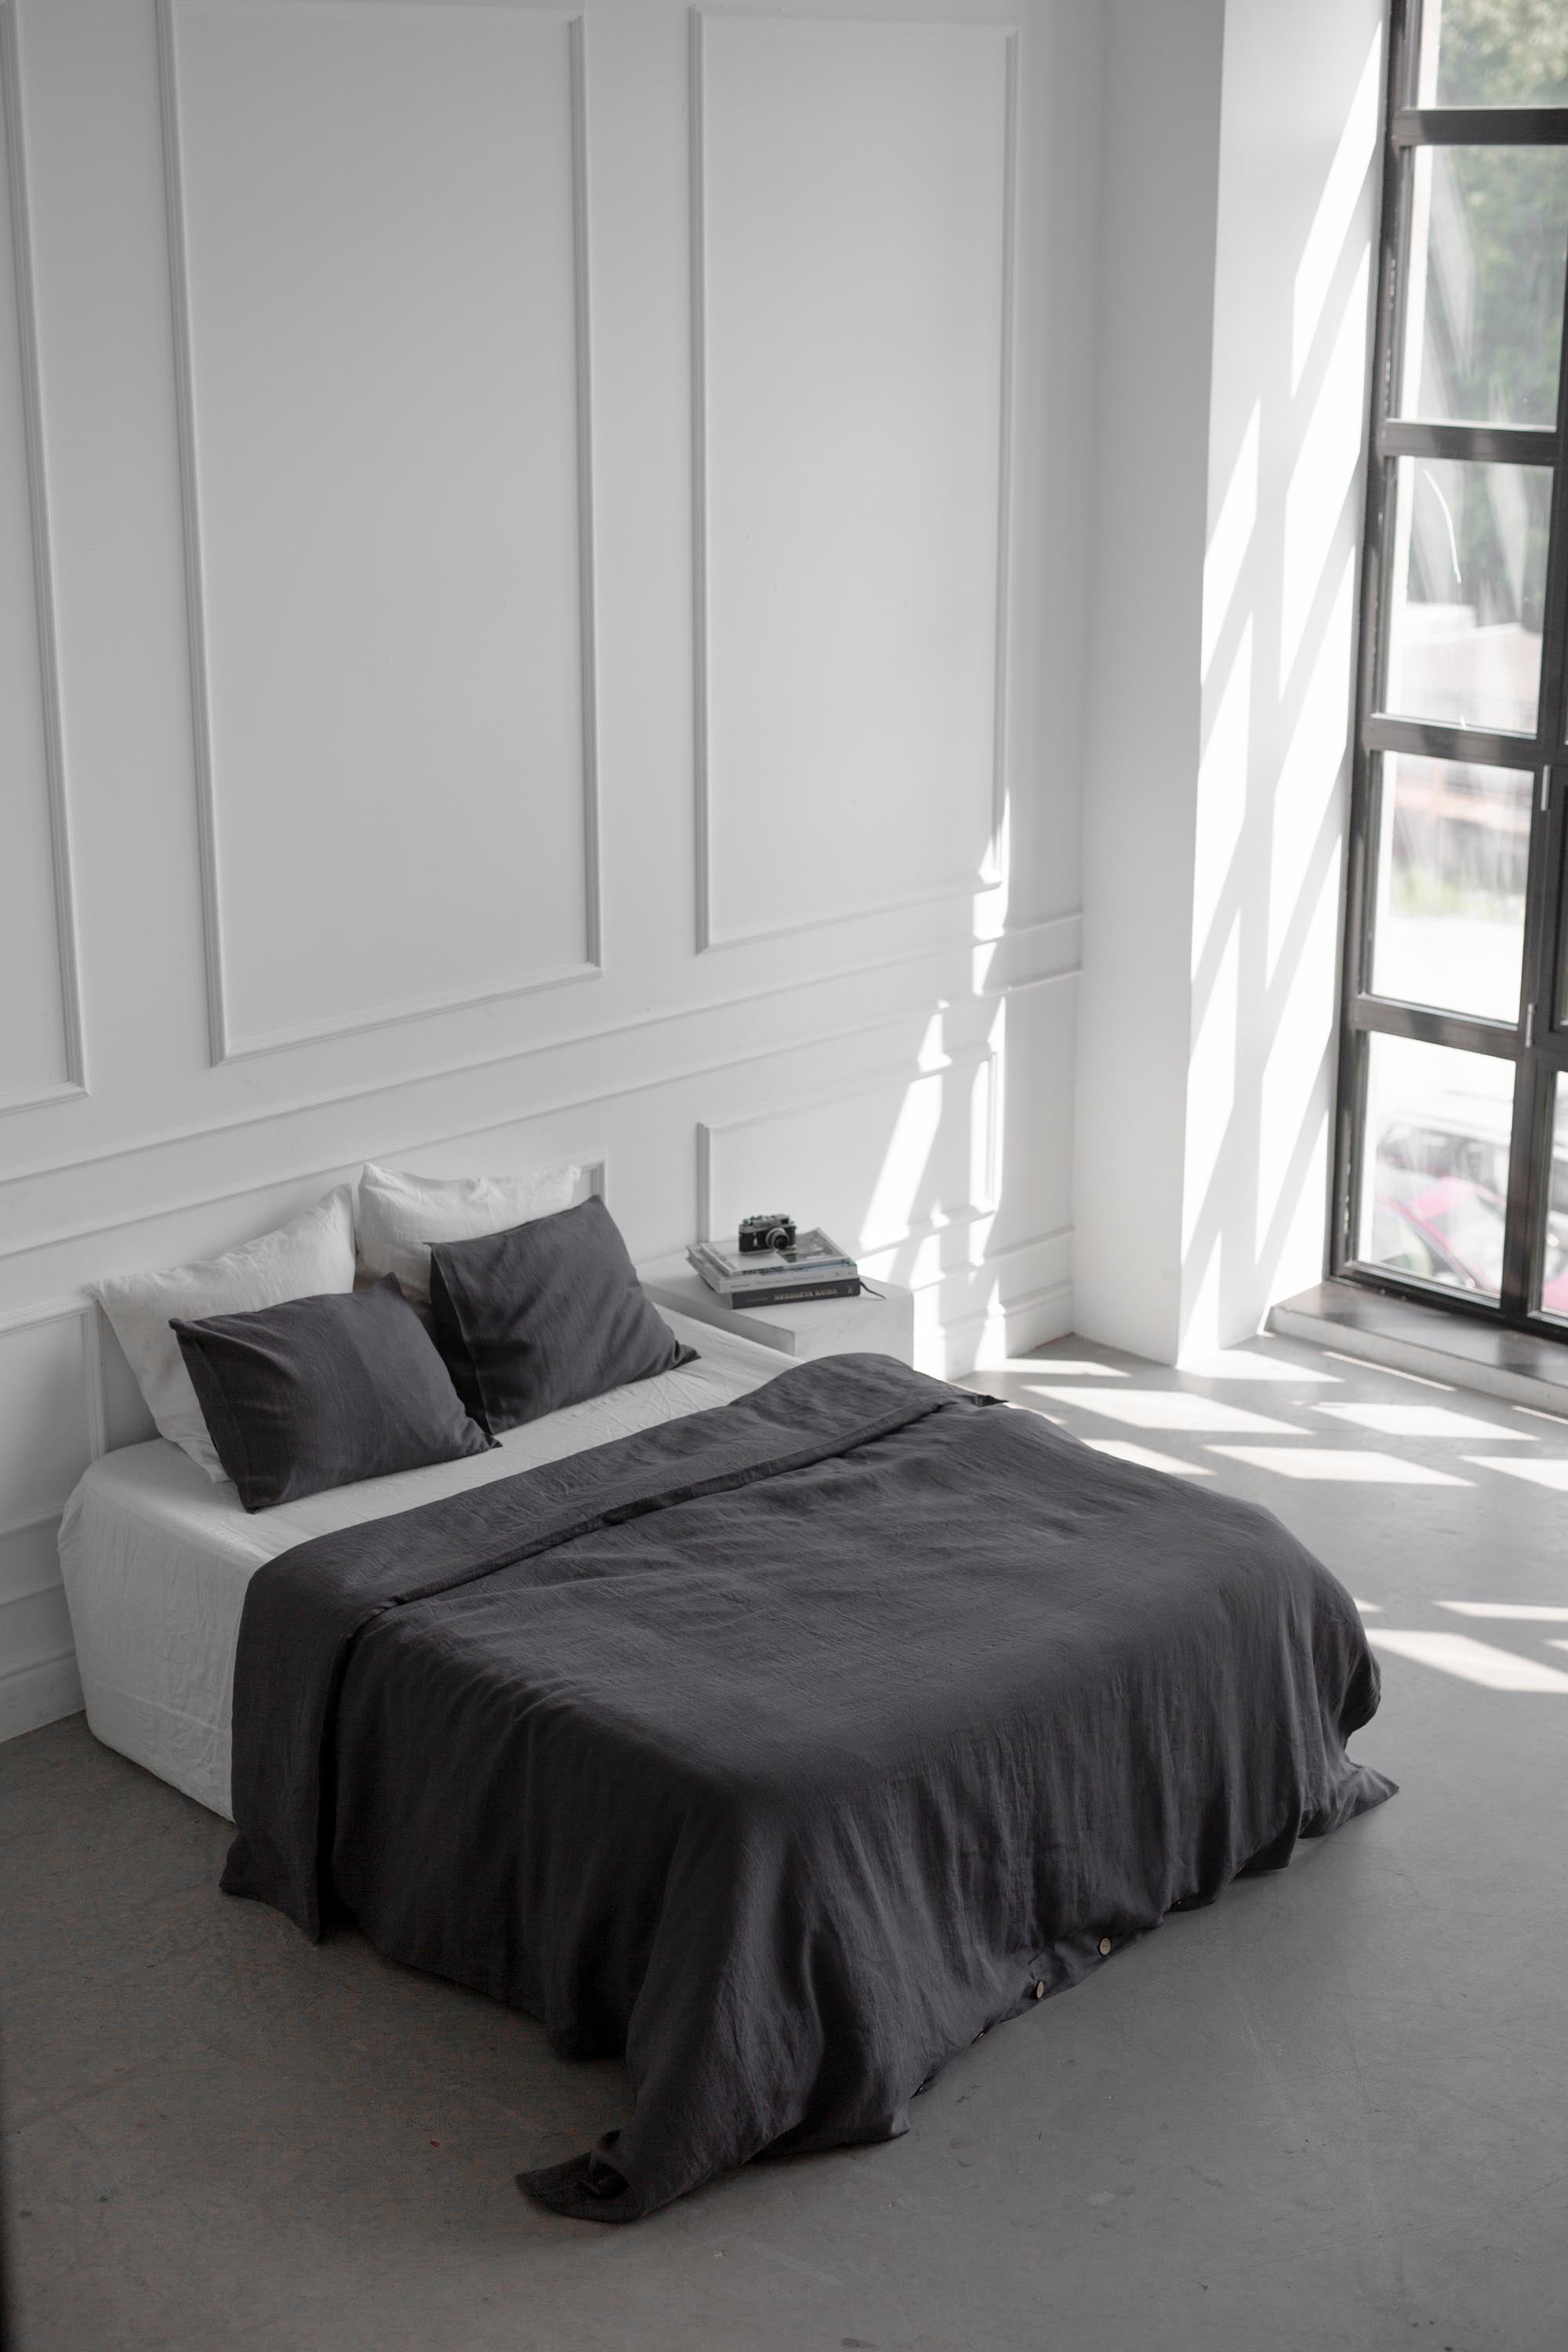 Bed With Charcoal Linen Bedding Set In A White Spacious Room